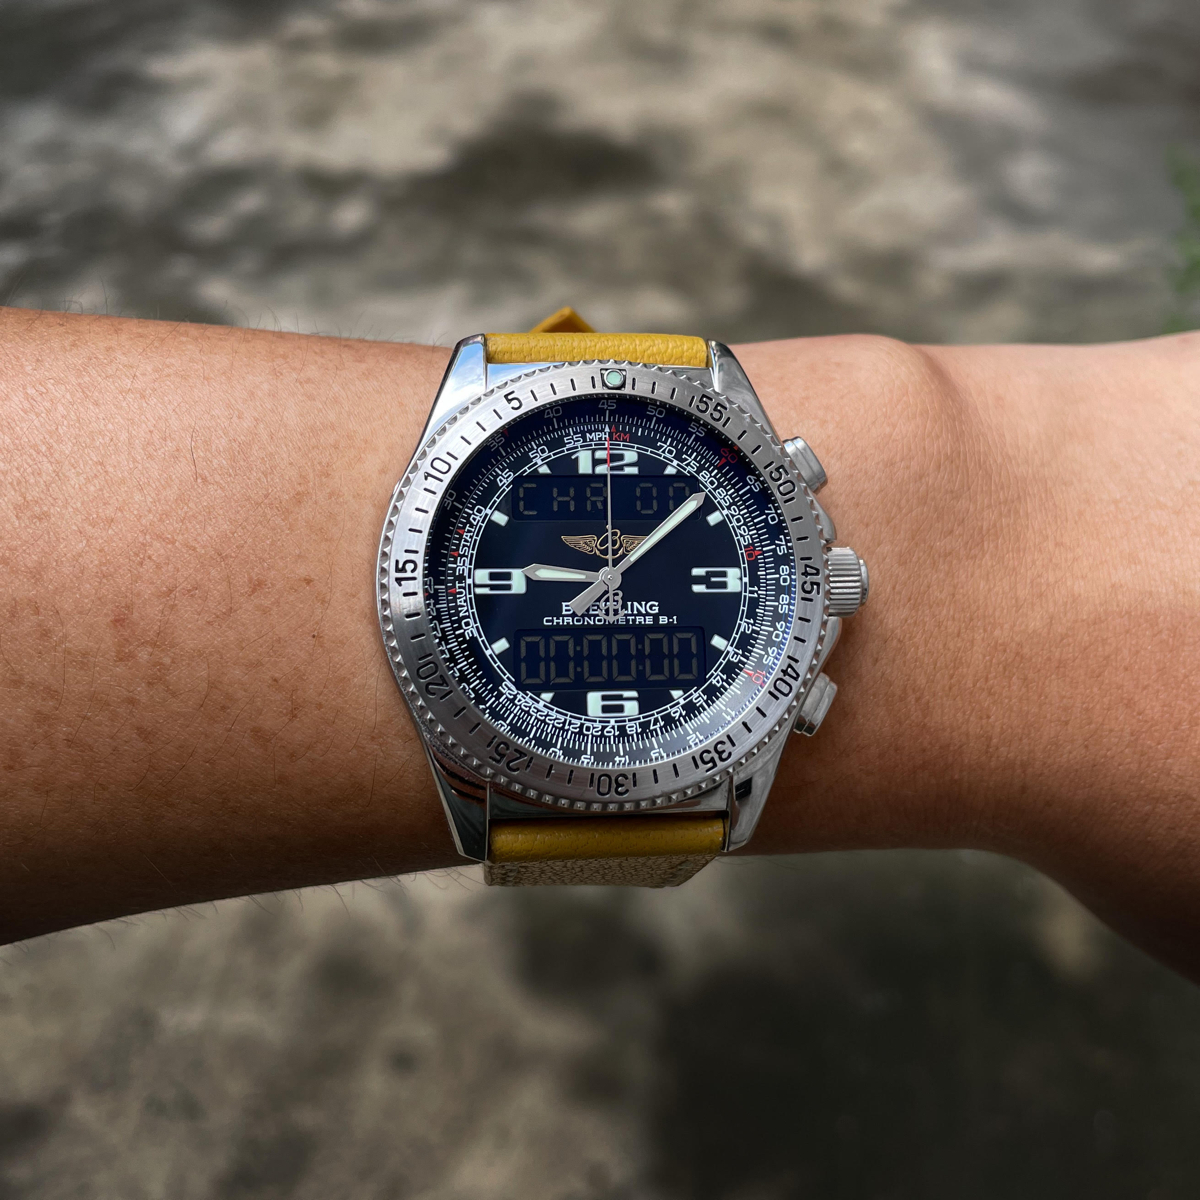 CM Watch Repair - Today we have a Breitling B1 that came... | Facebook